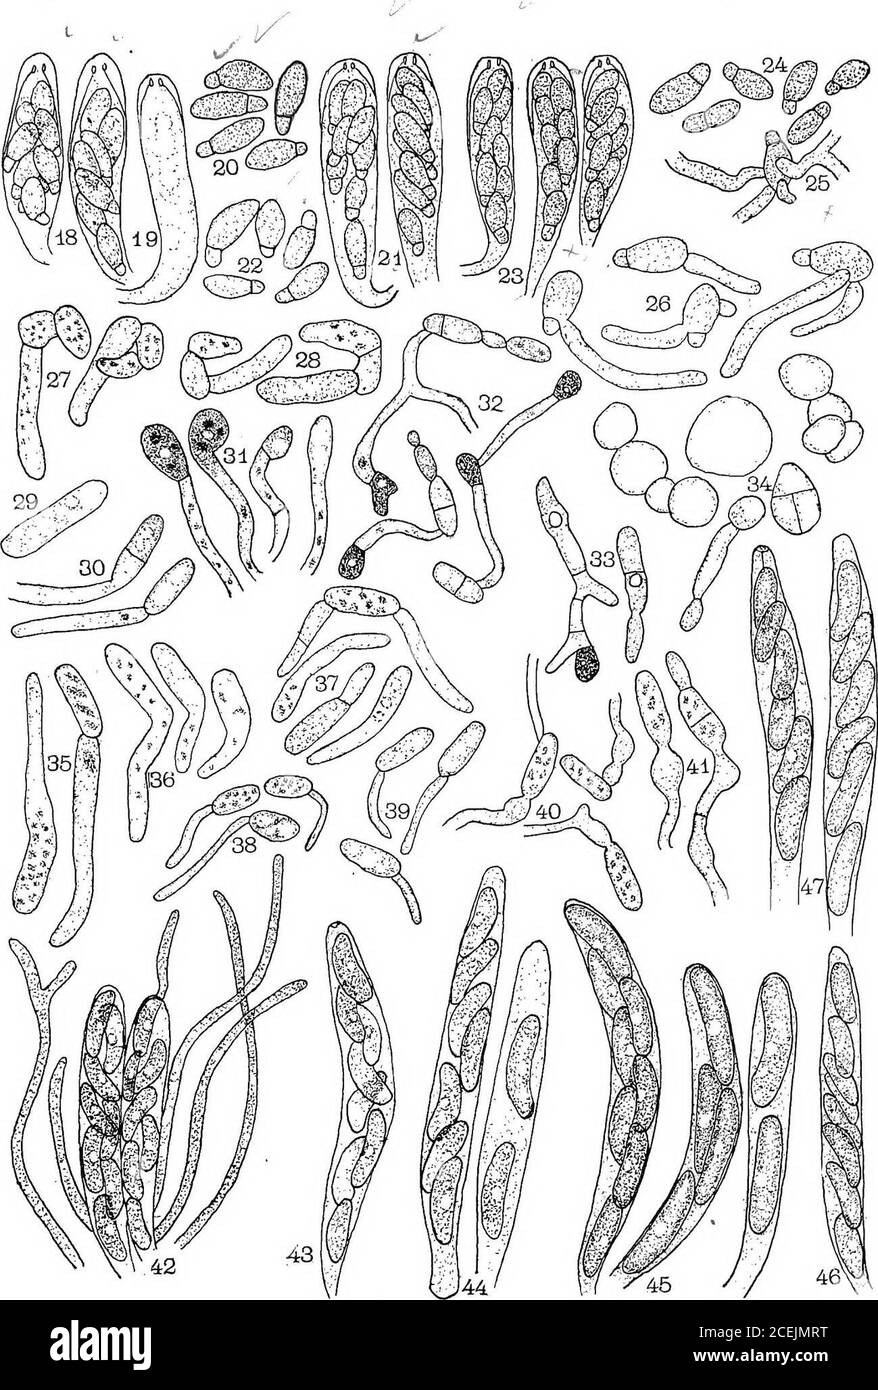 . The physiology and development of some anthracnoses ... pores formed in old cultures.Fig. 32.—Same, secondary spores formed by germinating conidia. 408 • BOTANICAL GAZETTE [june Fig. 33.—Gloeosporium from apple from New York, secondary spores formedby germinating conidia. Fig. 34.—CoUetotrichumgossypium from cotton; large cells formed in Elfvingsnutrient solution; one of these cells germinating, with a young spore at the end ofthe germ tube. Fig. 35.—Conidia from quince, germinating in bean agar. Fig. 36.—Conidia from tomato germinating in bean agar. Fig. 37.—Conidia from apple from New York Stock Photo